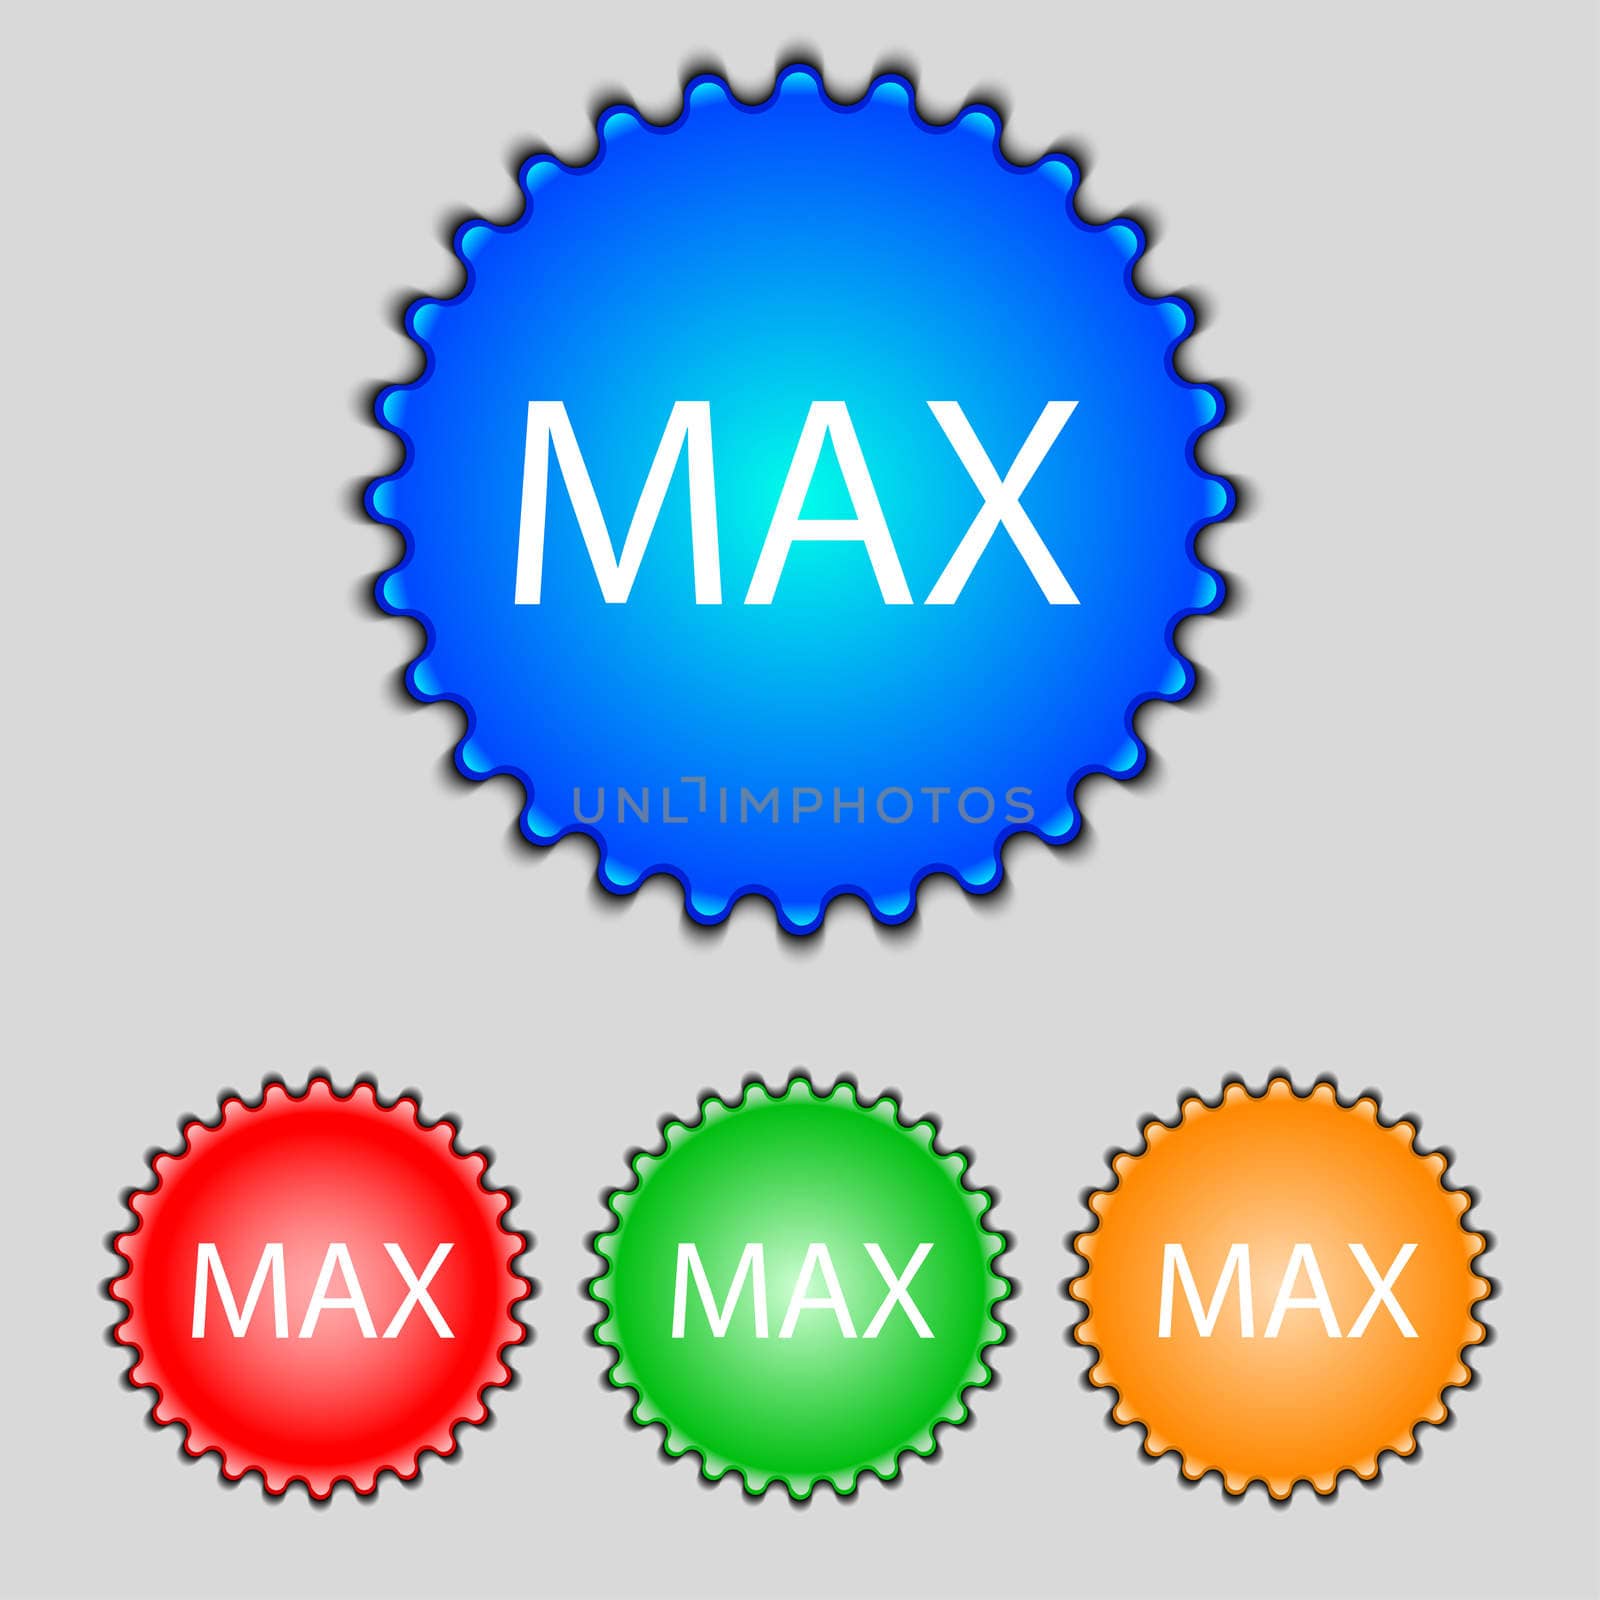 maximum sign icon. Set of colored buttons. illustration